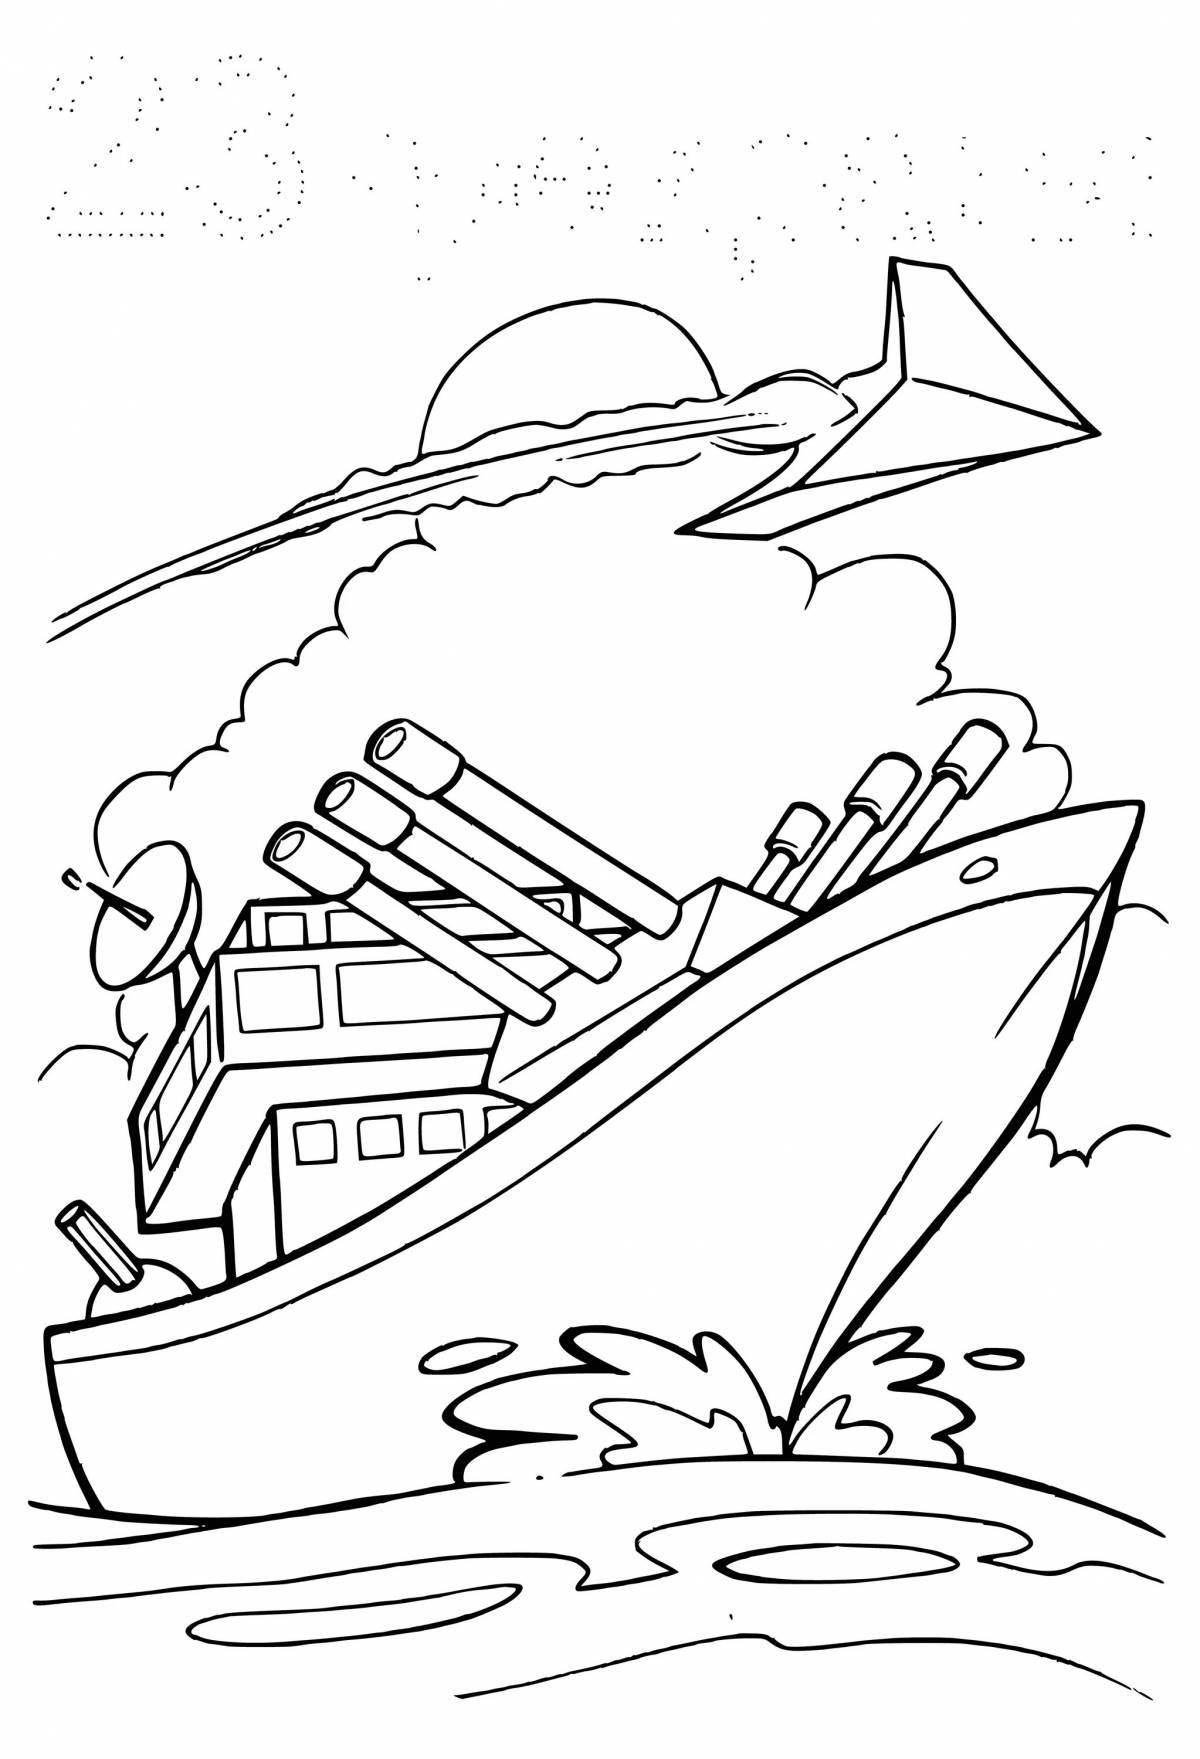 Impressive military tanker aircraft coloring page